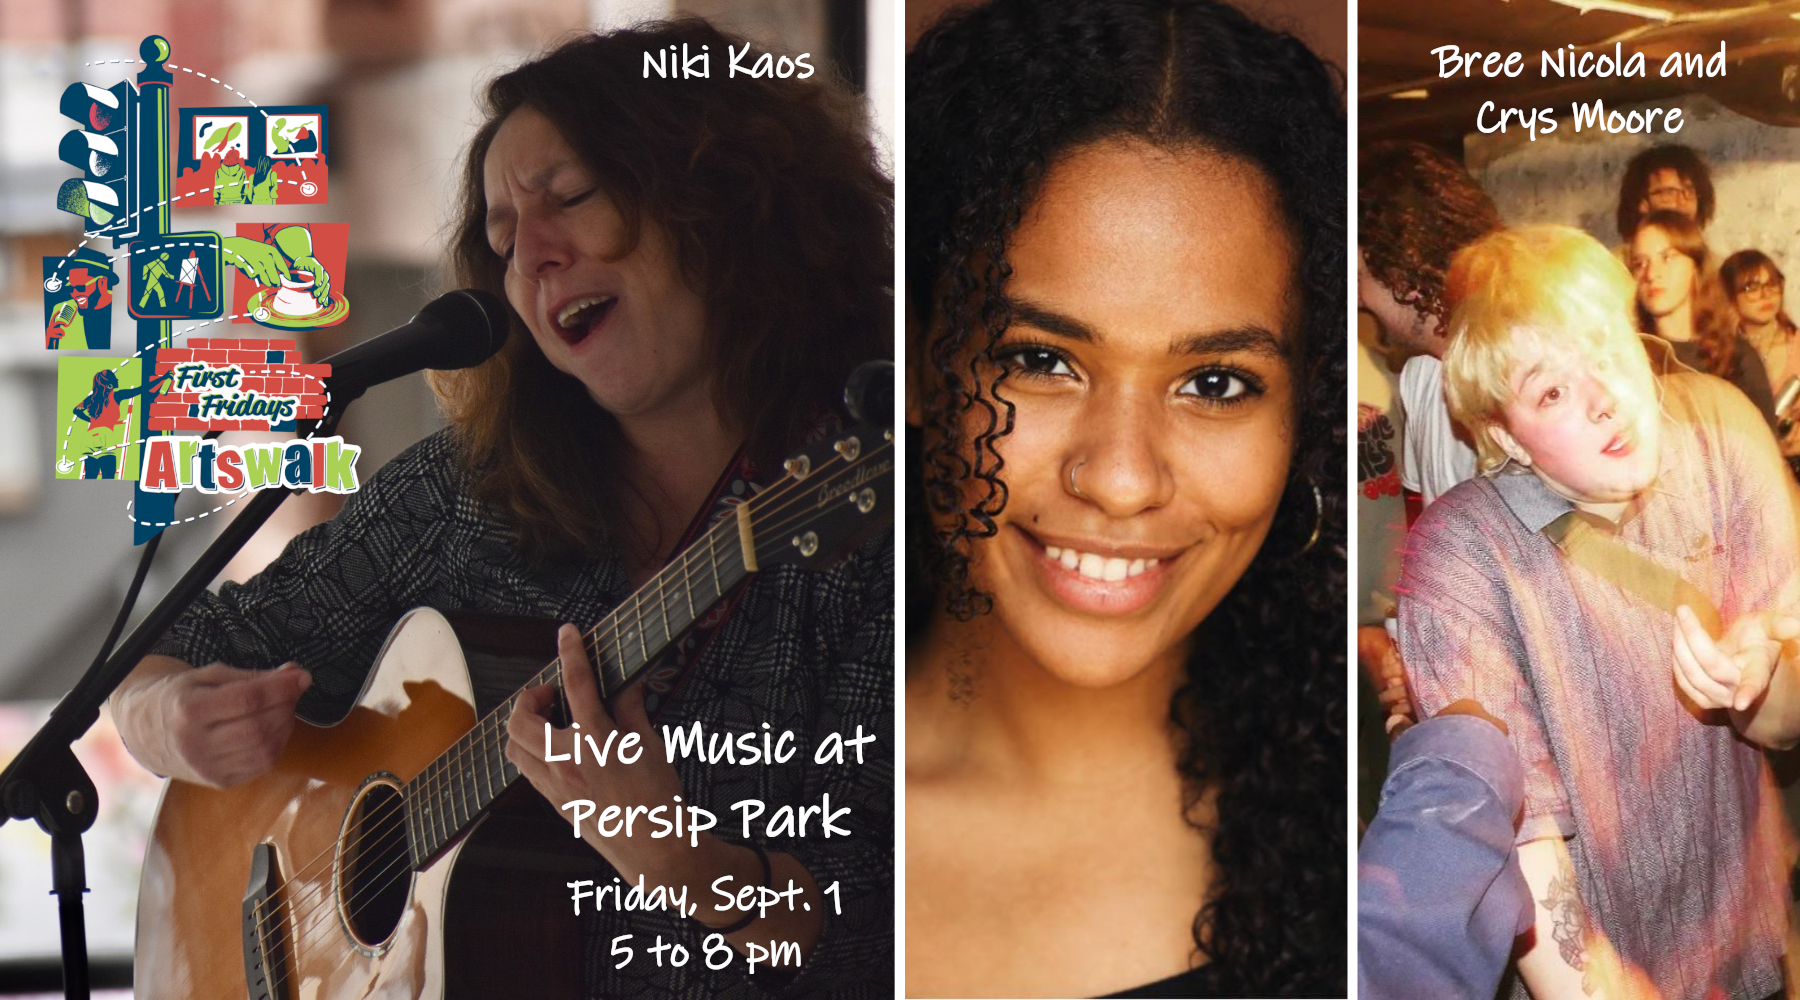 On Friday, September 1, solo musician Niki Kaos and duo Bree Nicola and Crys Moore will share the stage at Persip Park, 175 North Street, as part of the First Fridays Artswalk.